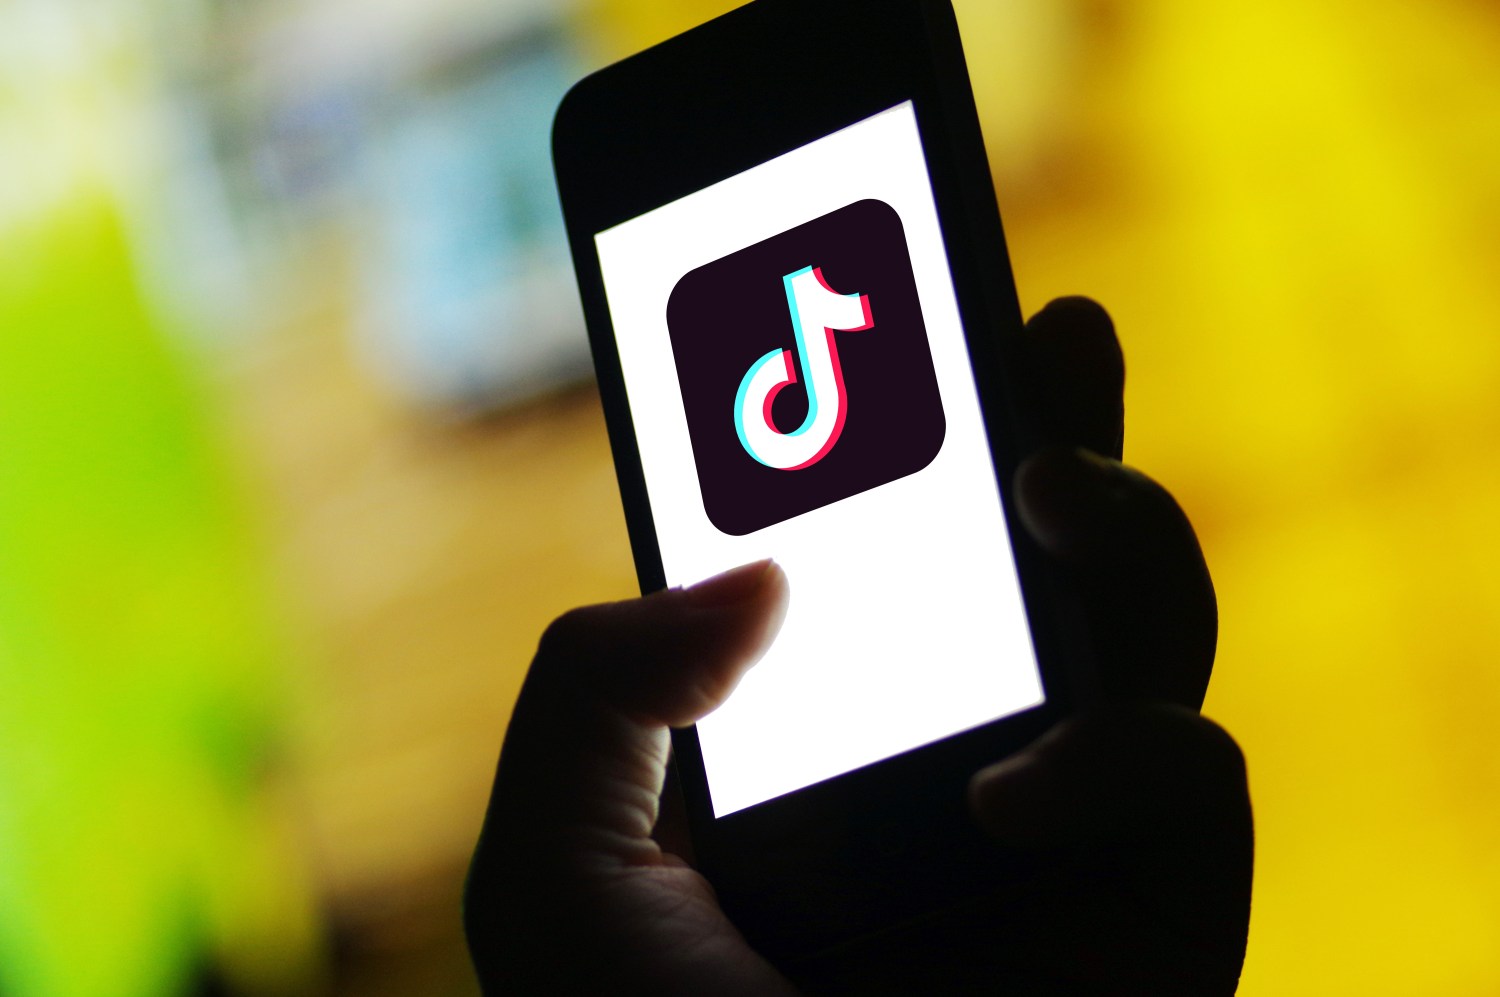 --FILE--A netizen uses the mobile app of Tik Tok, an overseas iteration of short video app Douyin, of Beijing Bytedance Technology Co Ltd, in Ji'nan city, east China's Shandong province, 20 April 2017.Short video app TikTok said on Thursday (27 Ferbuary 2019) it is ready for large-scale business exploration in North America after the company agreed to settle with the United States Federal Trade Commission for $5.7 million as its sister app was accused of violating local rules. The US government agency launched an investigation on Musical.ly, a popular lip-sync video app in 2016, suspecting it has violated the Children's Online Privacy Protection Act, which requires that developers or websites targeted at children under 13 must require parental consent to share personal information. The app was later acquired by Chinese multimedia giant Bytedance in 2017 and merged with TikTok the next year. "While we were 'accidentally' embroiled in this case, we've been actively in touch with the FTC," said a TikTok representative for North America in a written reply to China Daily. "With the current settlement, we are given green light to expand our business scope." Due to the investigations, TikTok did not introduce personalized ads services in the US. According to data from app intelligence firm Sensor Tower, TikTok's monthly downloads have been frequently higher than those of Facebook, Instagram, Snapchat and YouTube in the US since late last year.No Use China. No Use France.